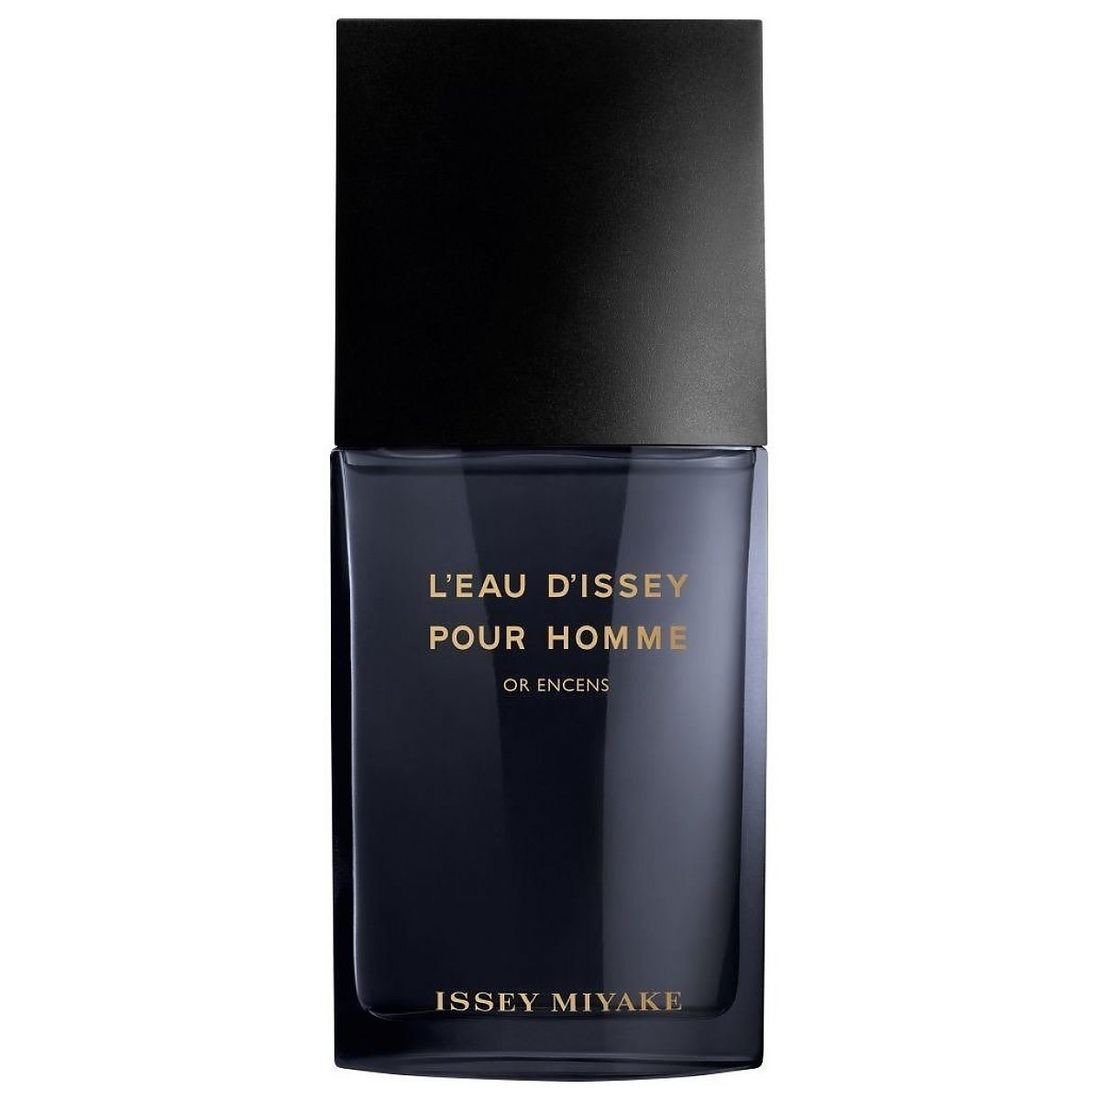 issey miyake l'eau d'issey pour homme or encens